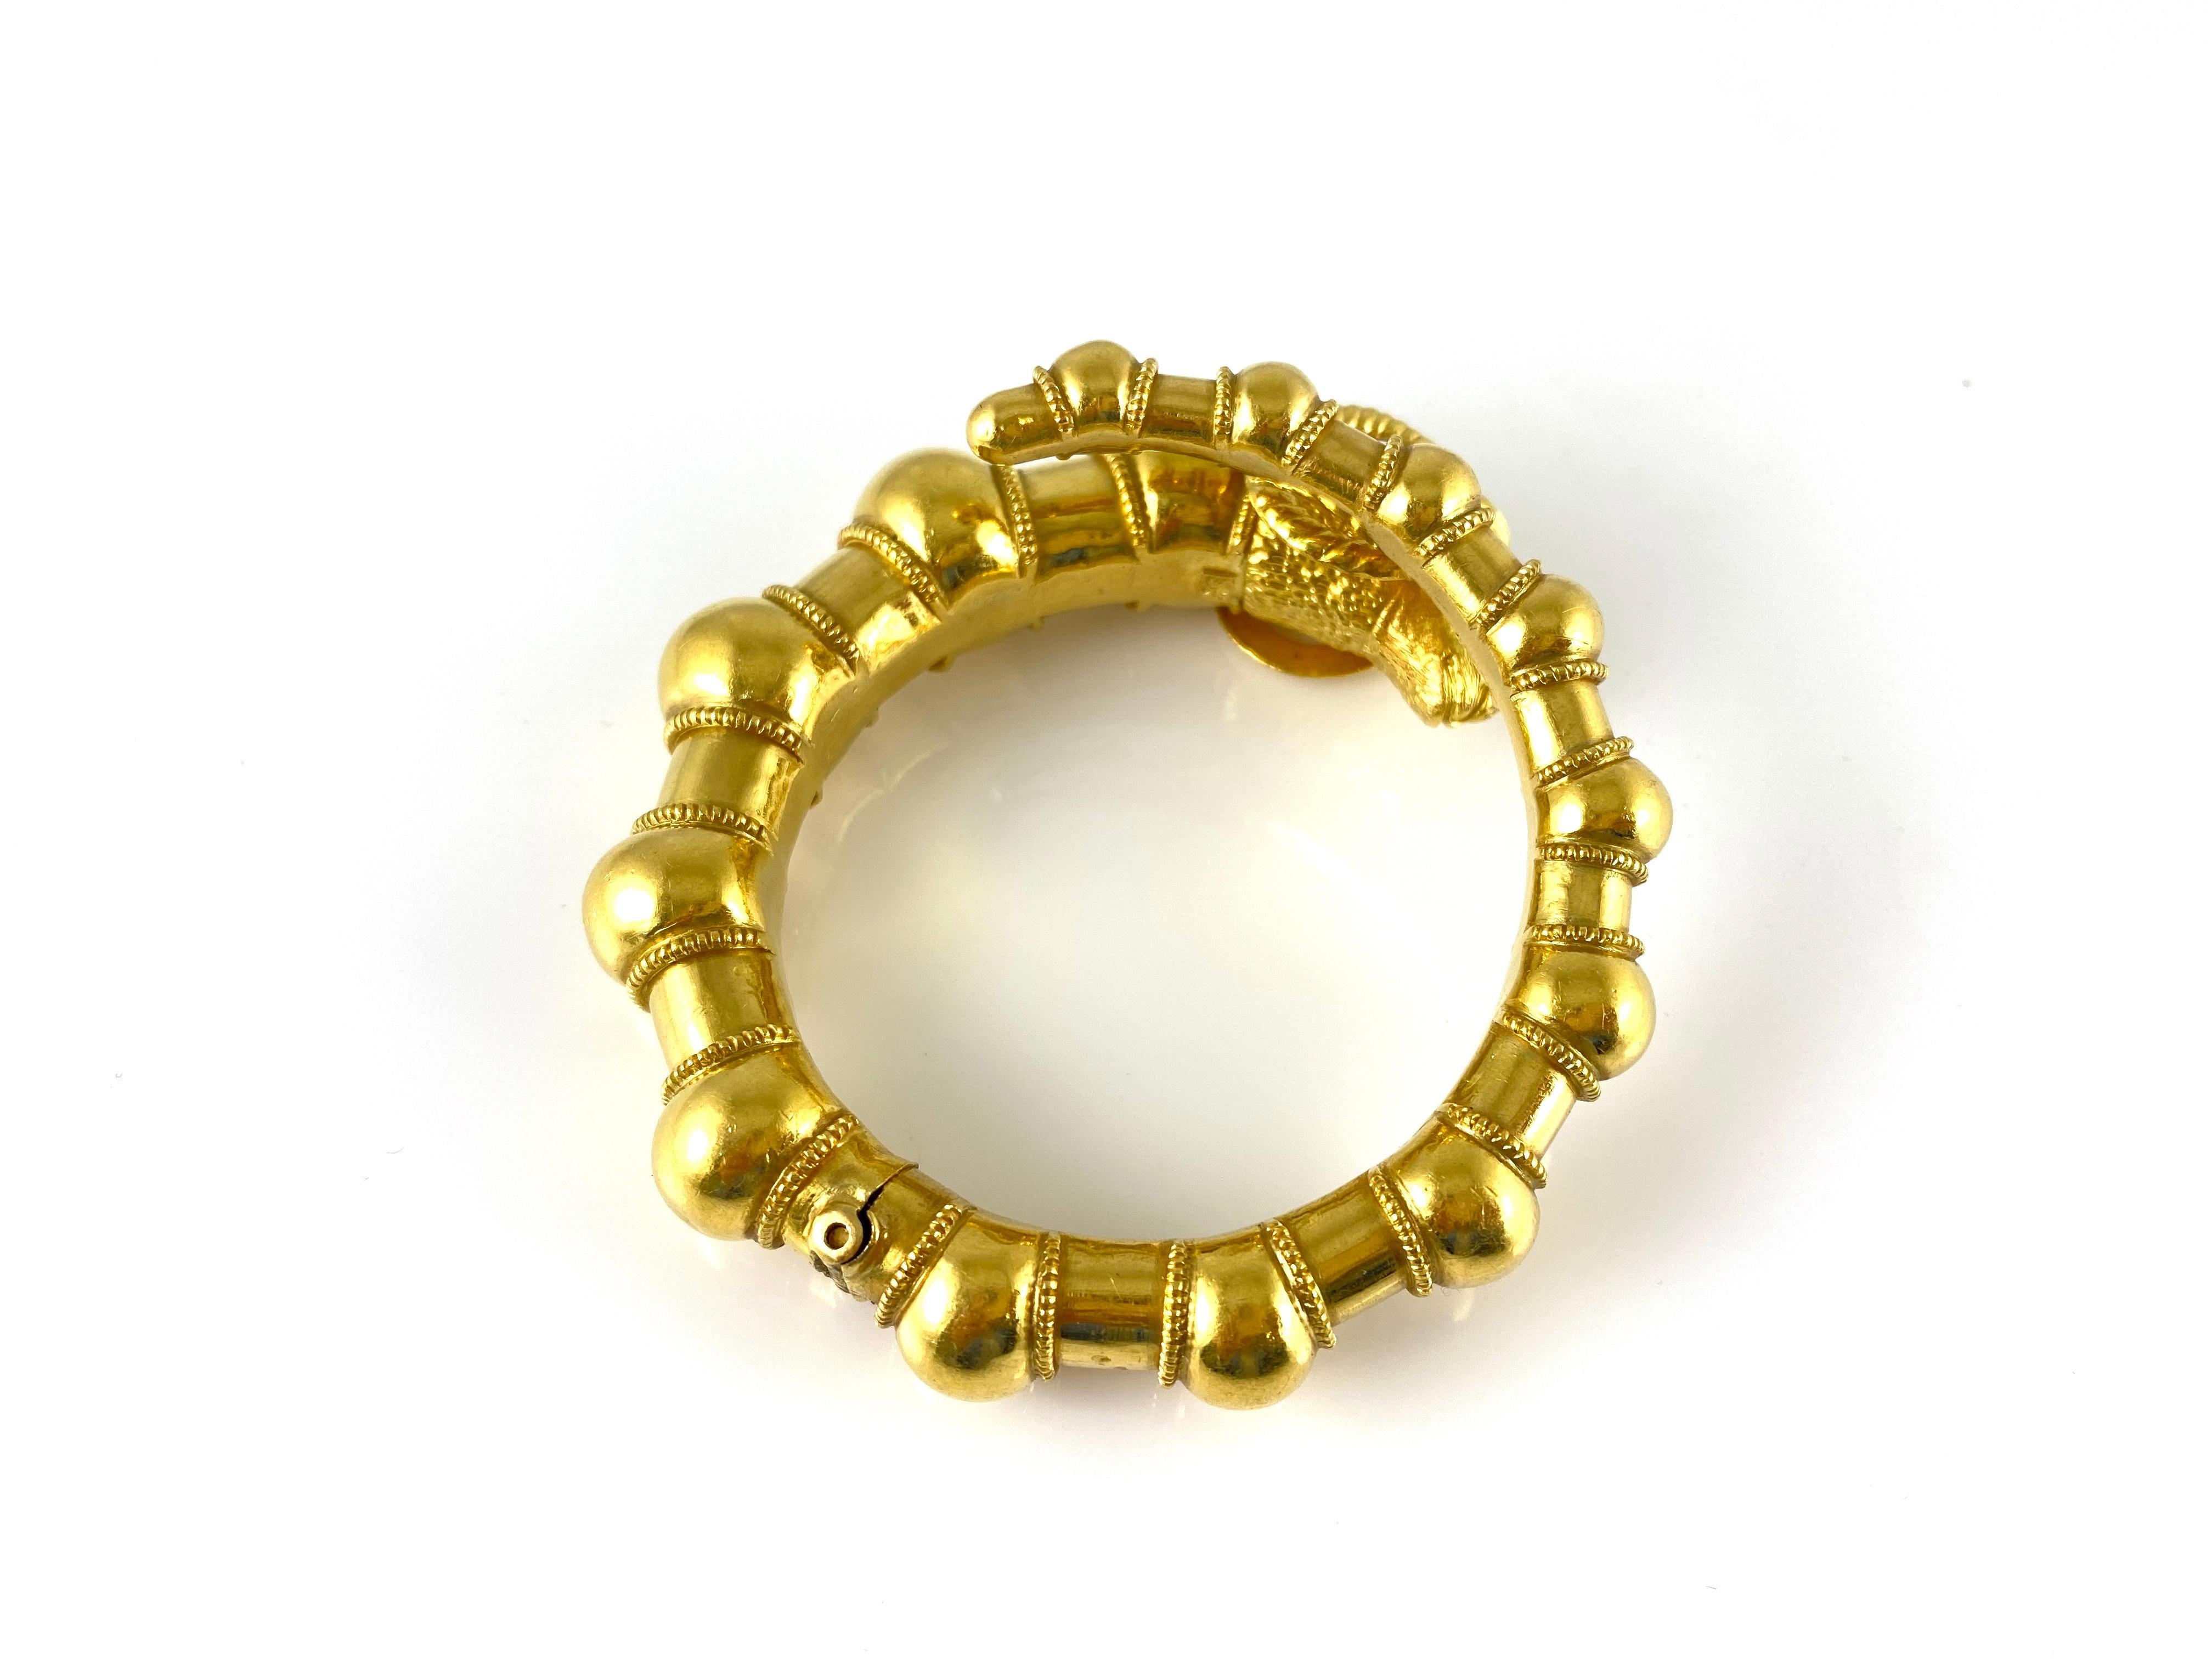 1960s Aries 22 Karat Gold Bracelet In Excellent Condition For Sale In New York, NY